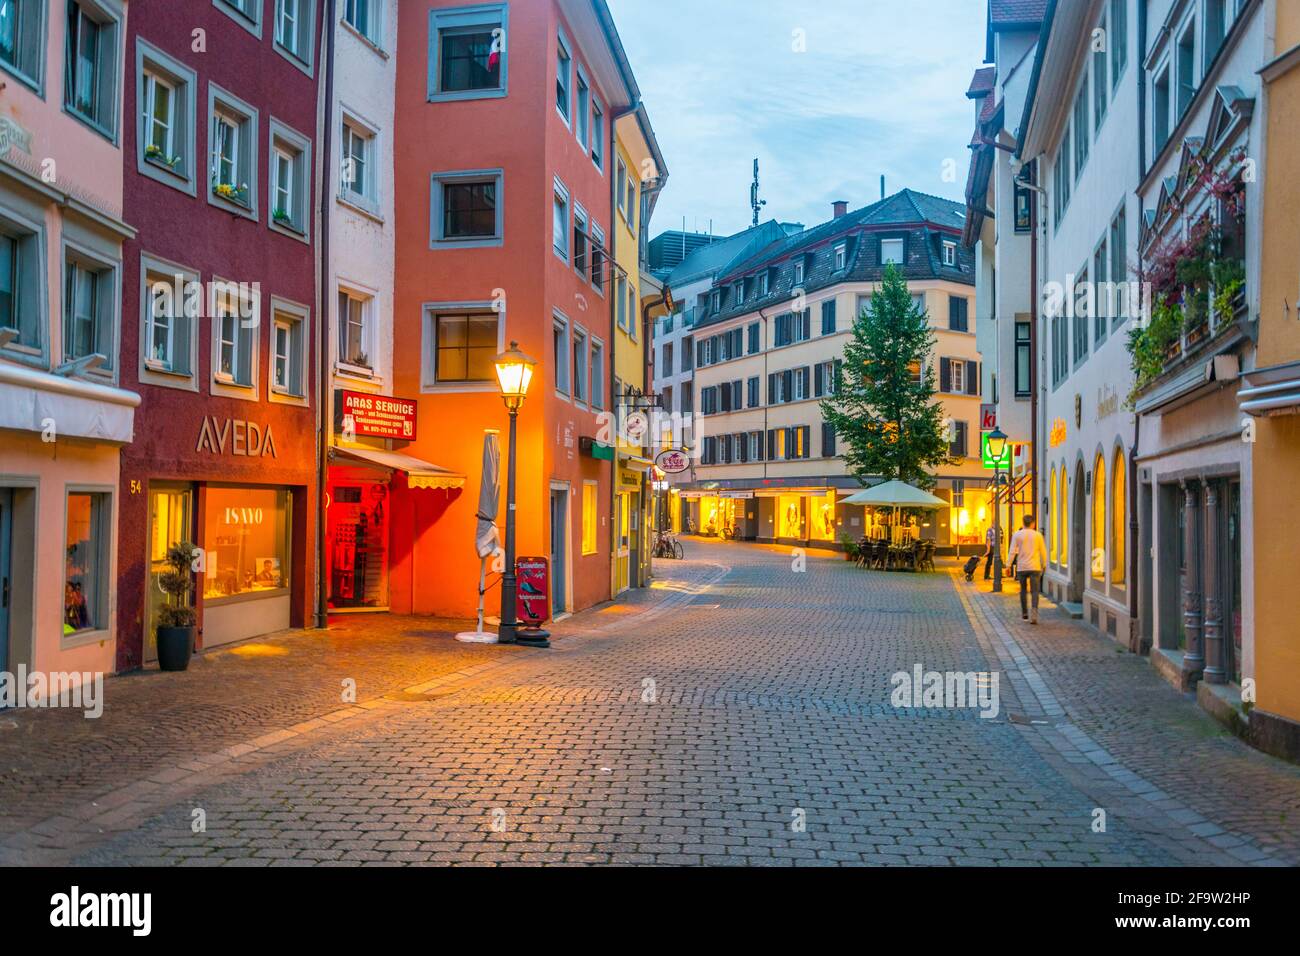 KONSTANZ, GERMANY, JULY 23, 2016: View of hussenstrasse street where czech priest Jan Hus lived during the Konstanz Konzil in Konstanz, Germany. Stock Photo